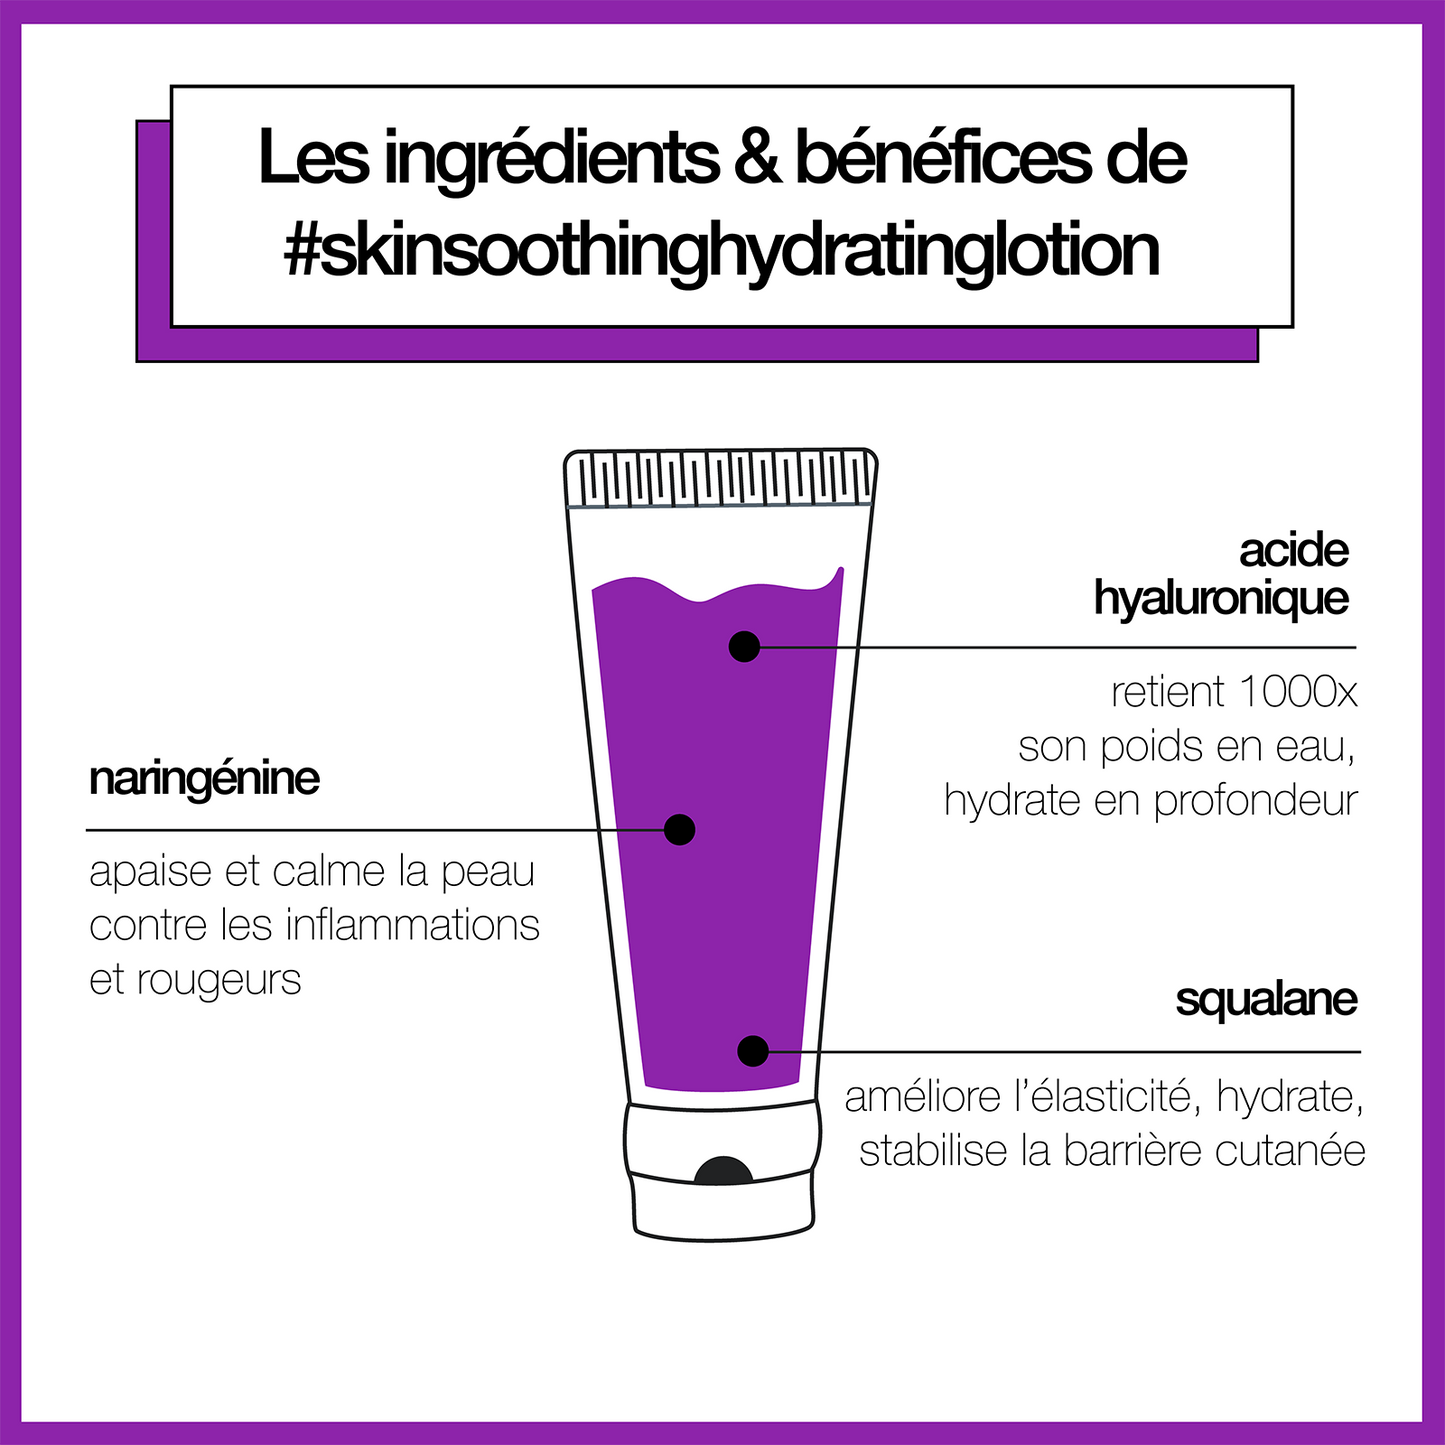 skin soothing hydrating lotion | émulsion hydratante apaisante non grasse